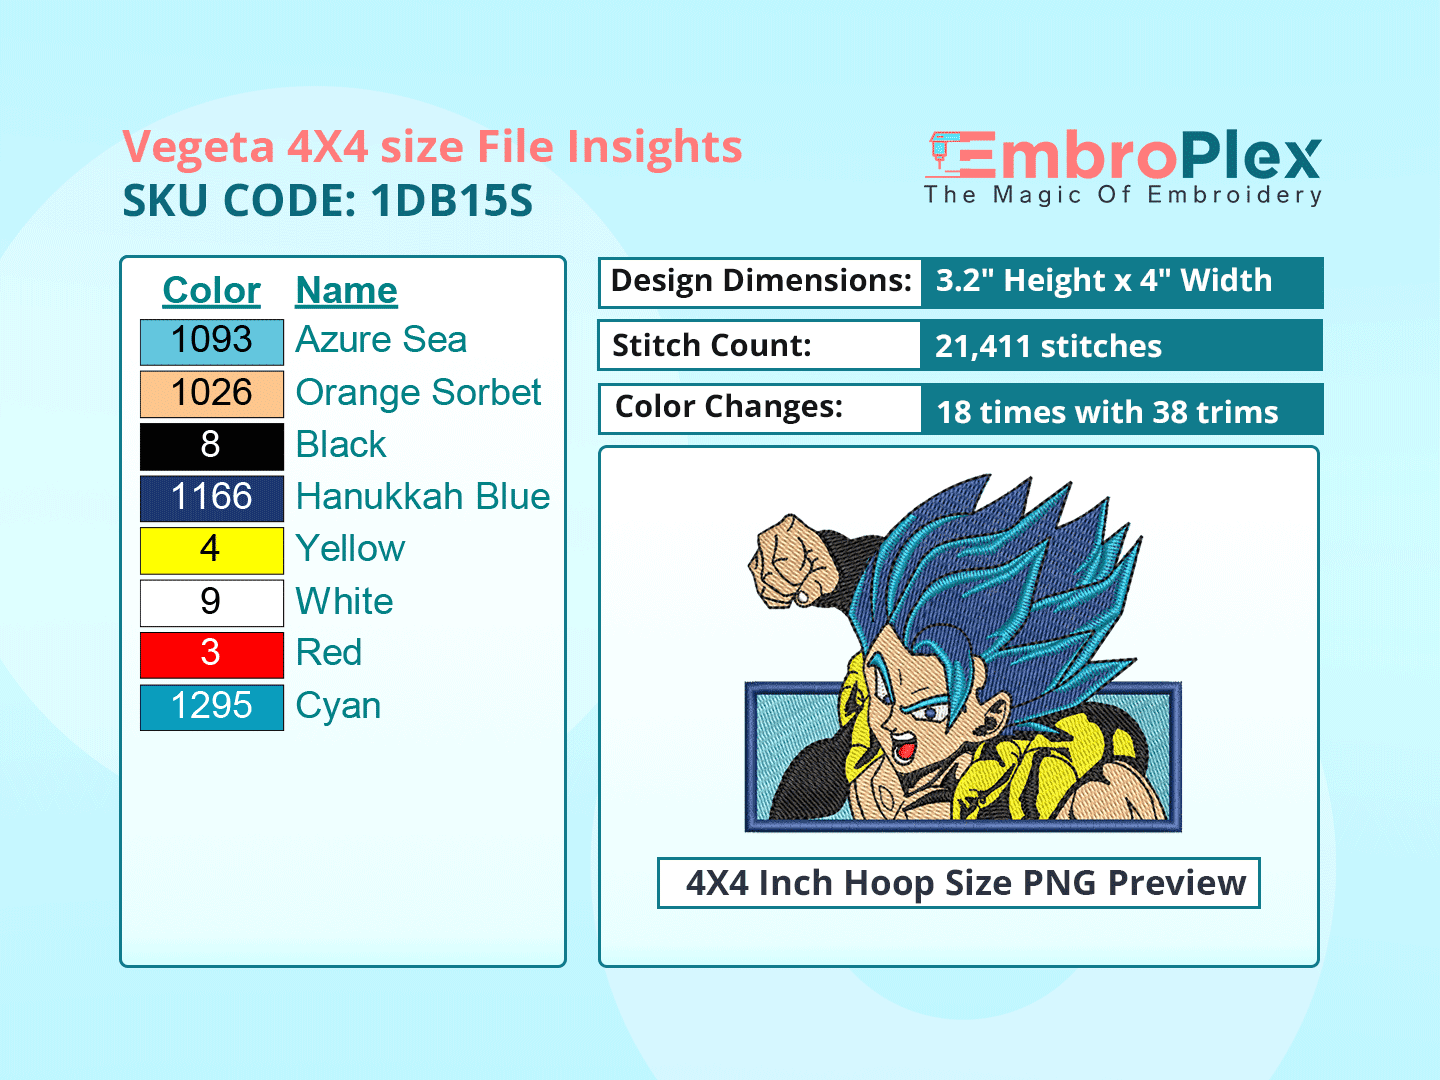 Anime-Inspired Vegeta Embroidery Design File - 4x4 Inch hoop Size Variation overview image